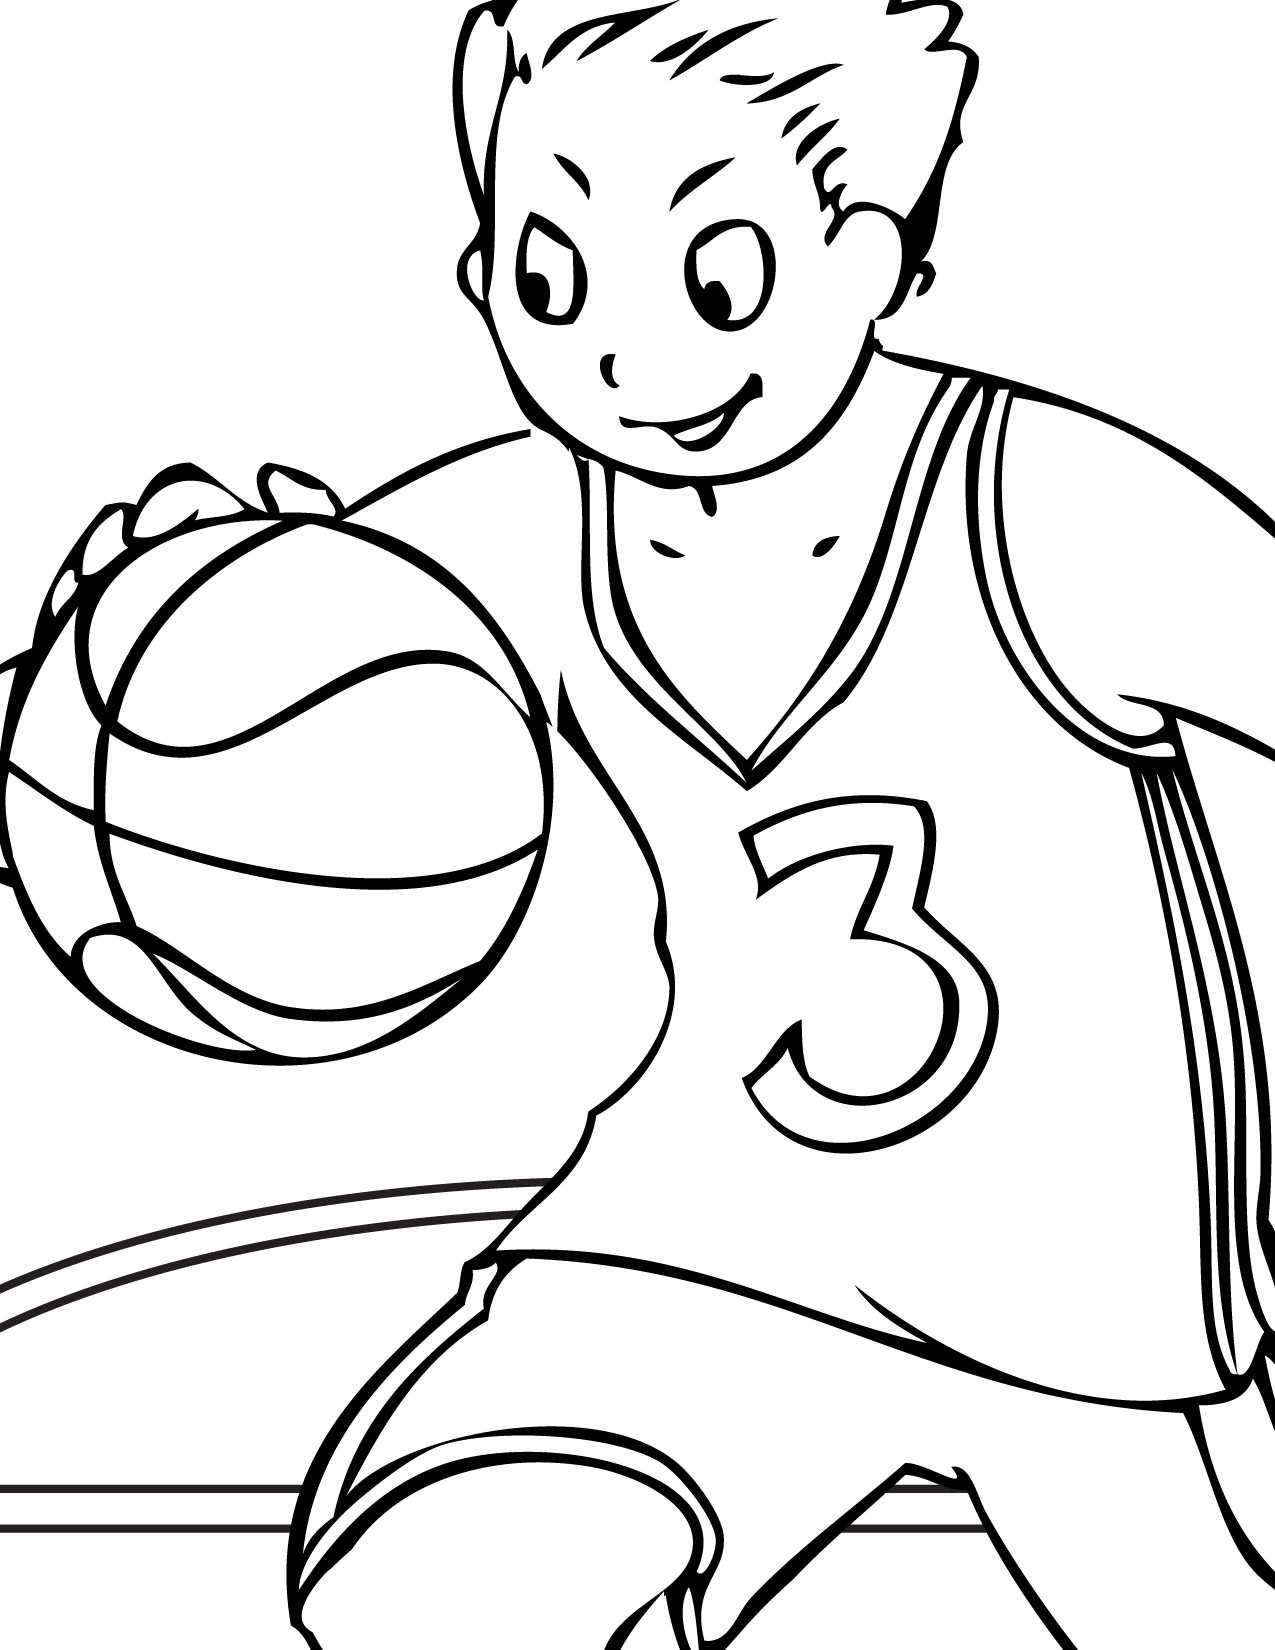 Online Coloring Kids
 Free Printable Volleyball Coloring Pages For Kids